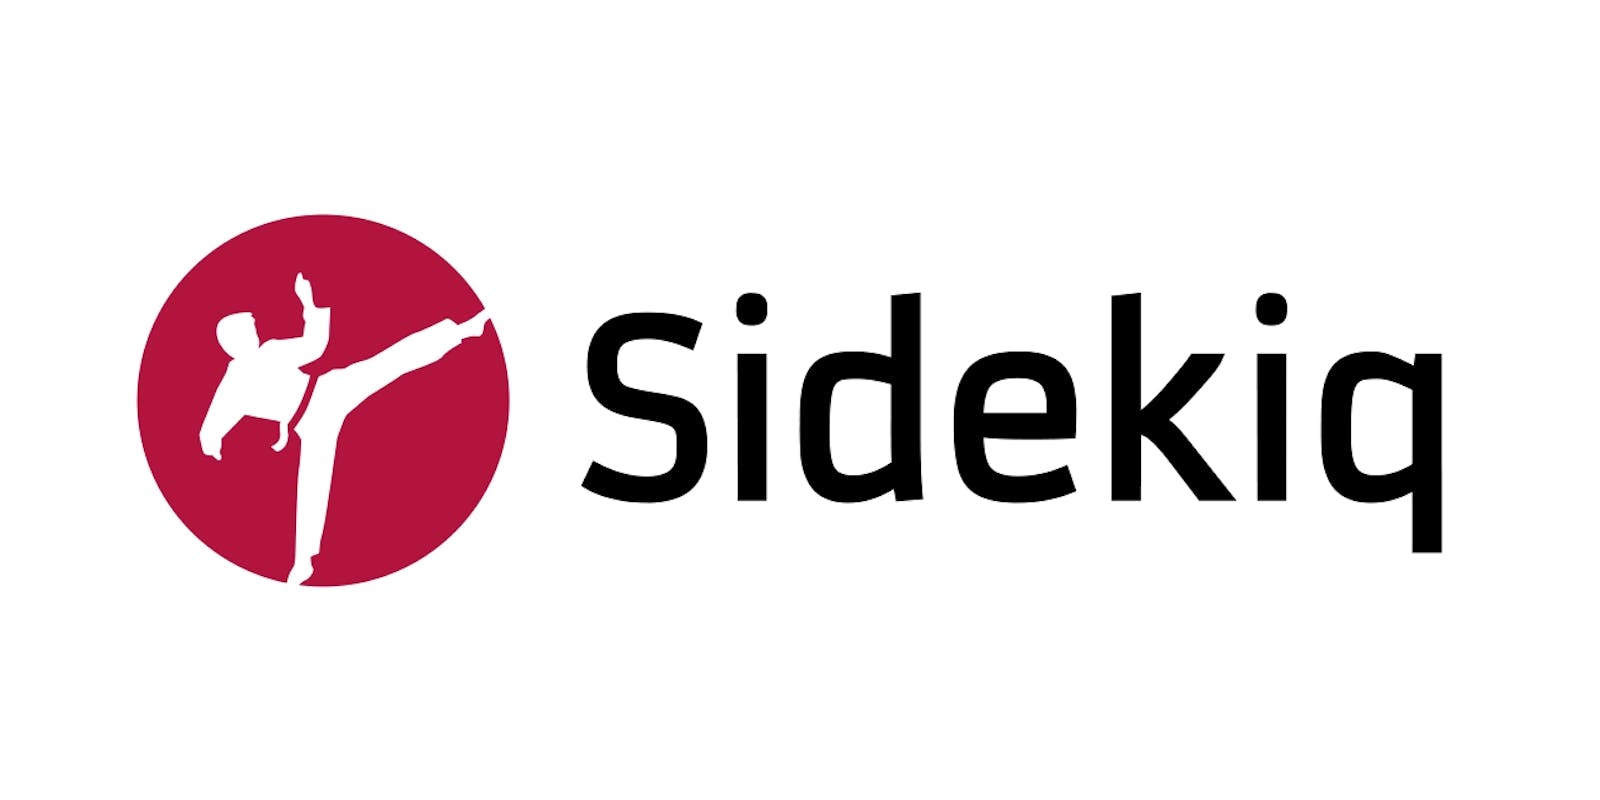 Sidekiq Tutorial & Overview: Is Sidekiq For Ruby Still Worth Working With After 10 Years?